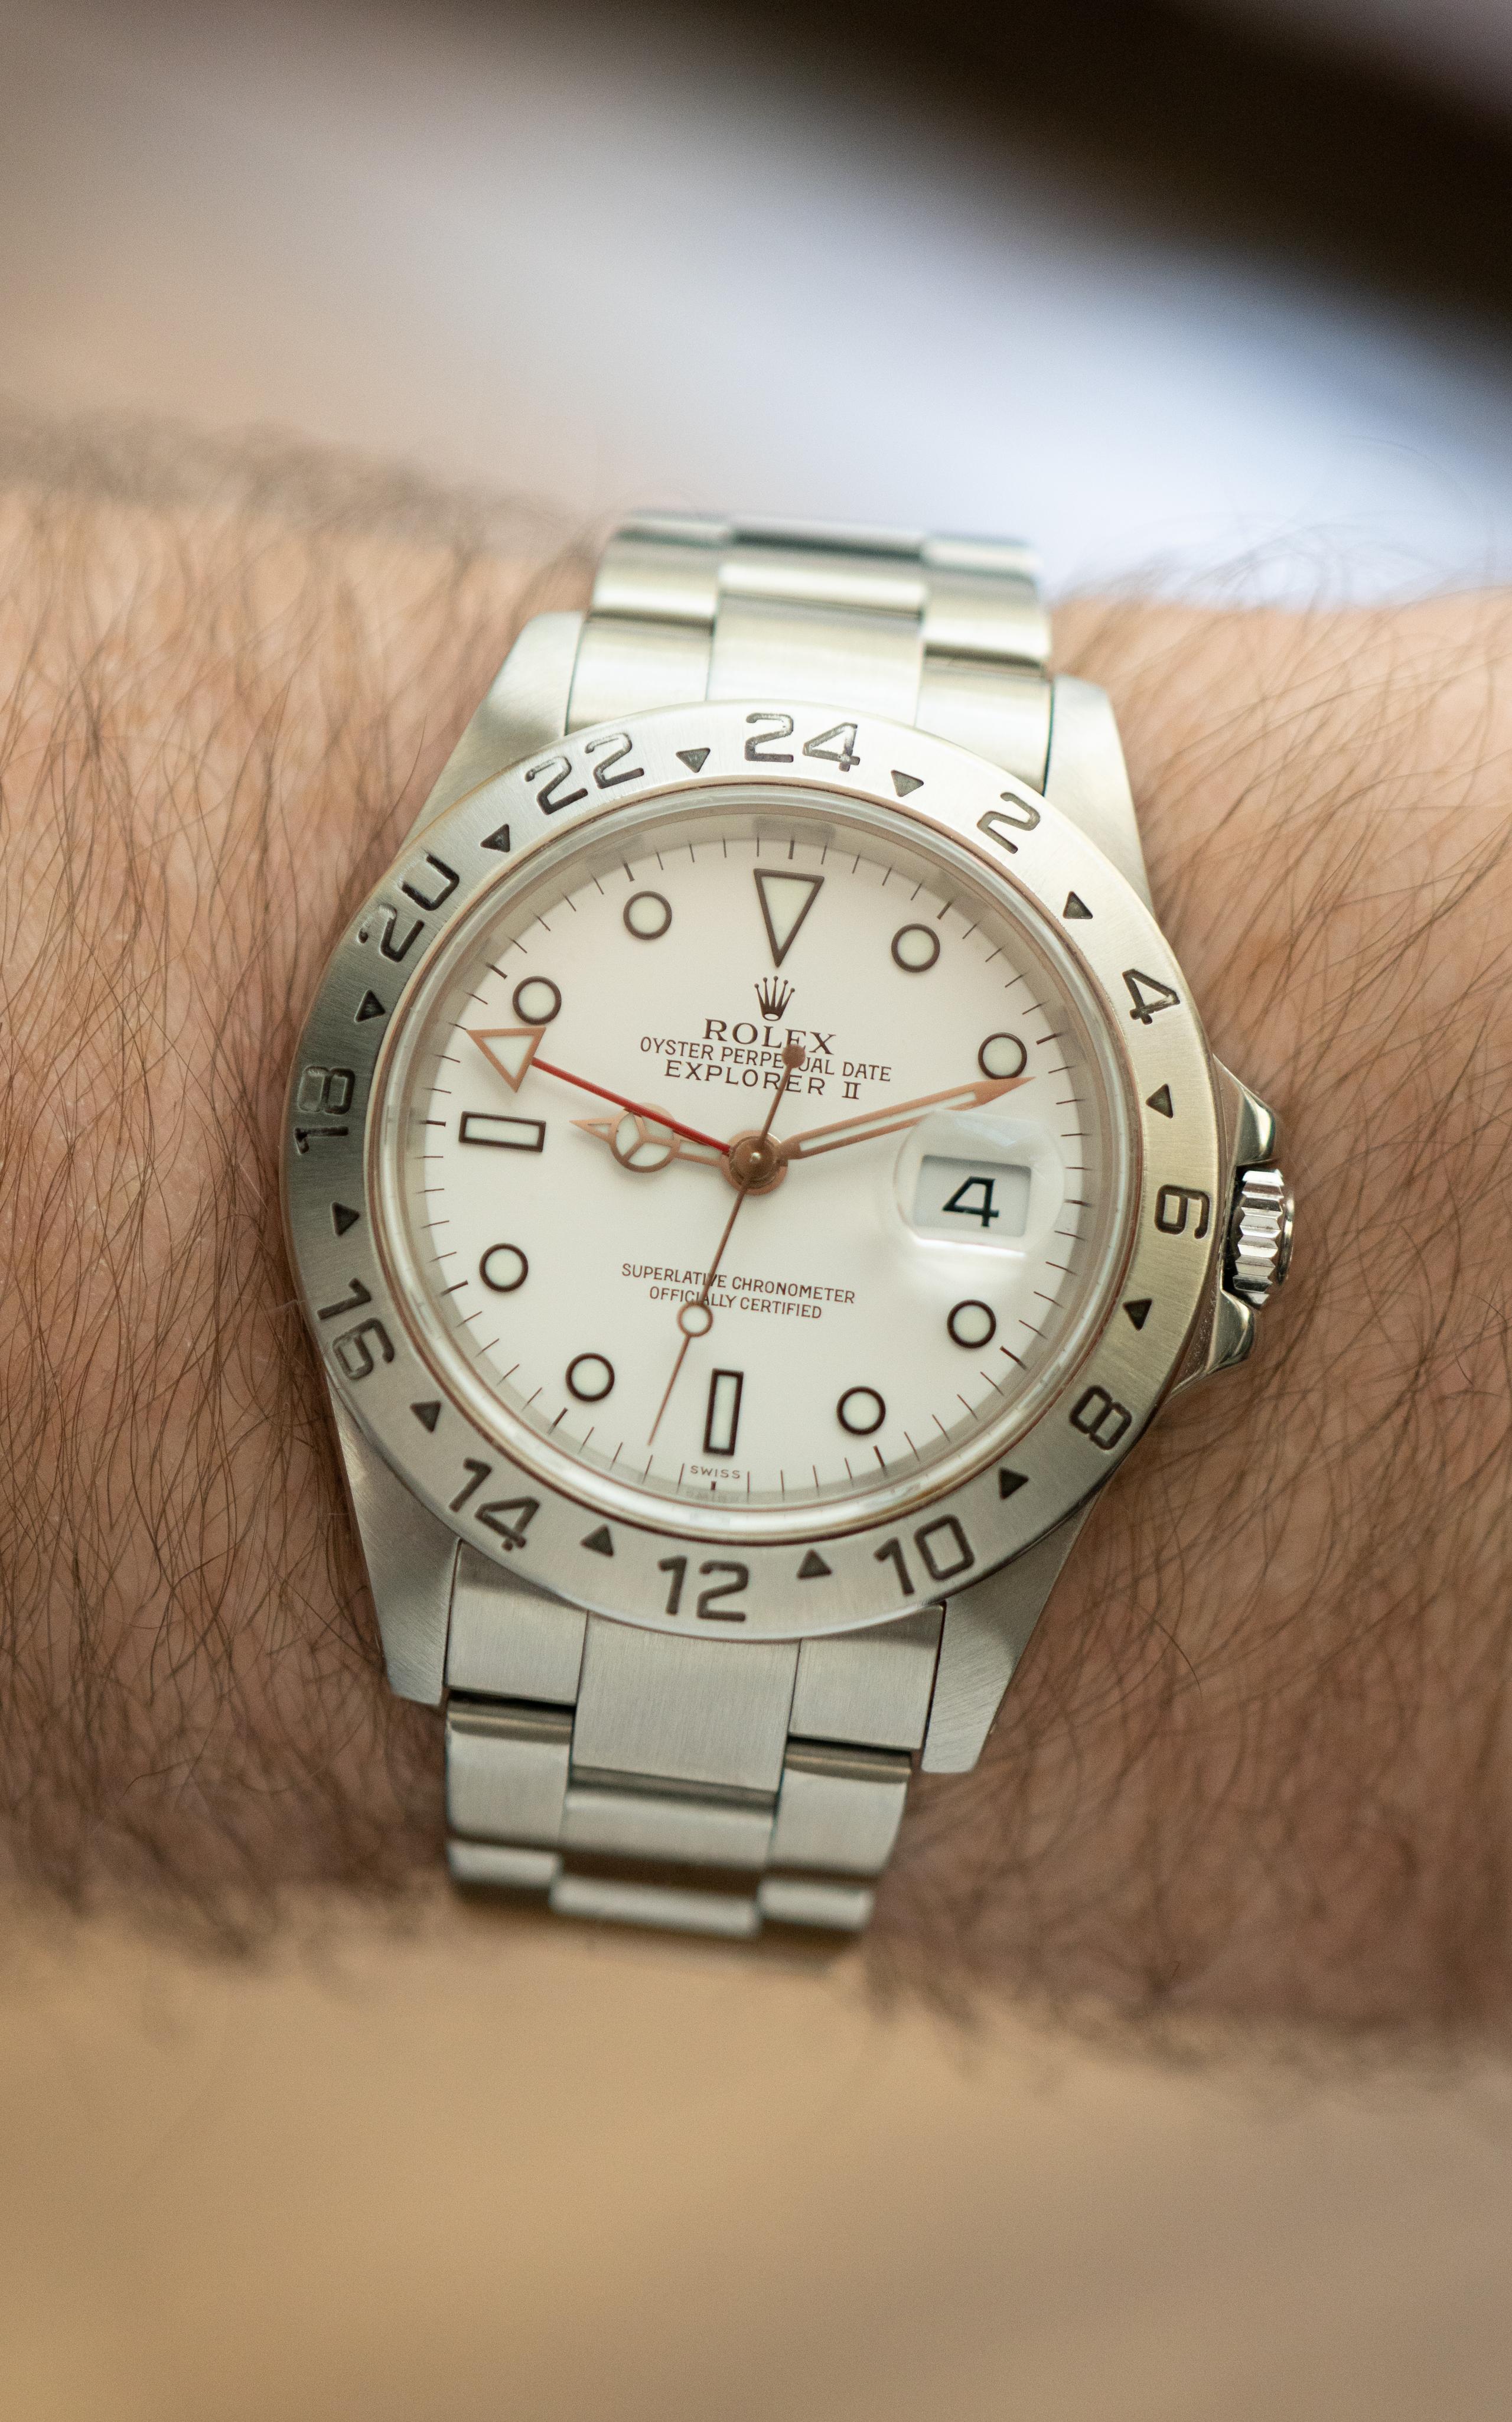 2002 Rolex Explorer II Stainless Steel Model 16570 In Good Condition For Sale In New York, NY